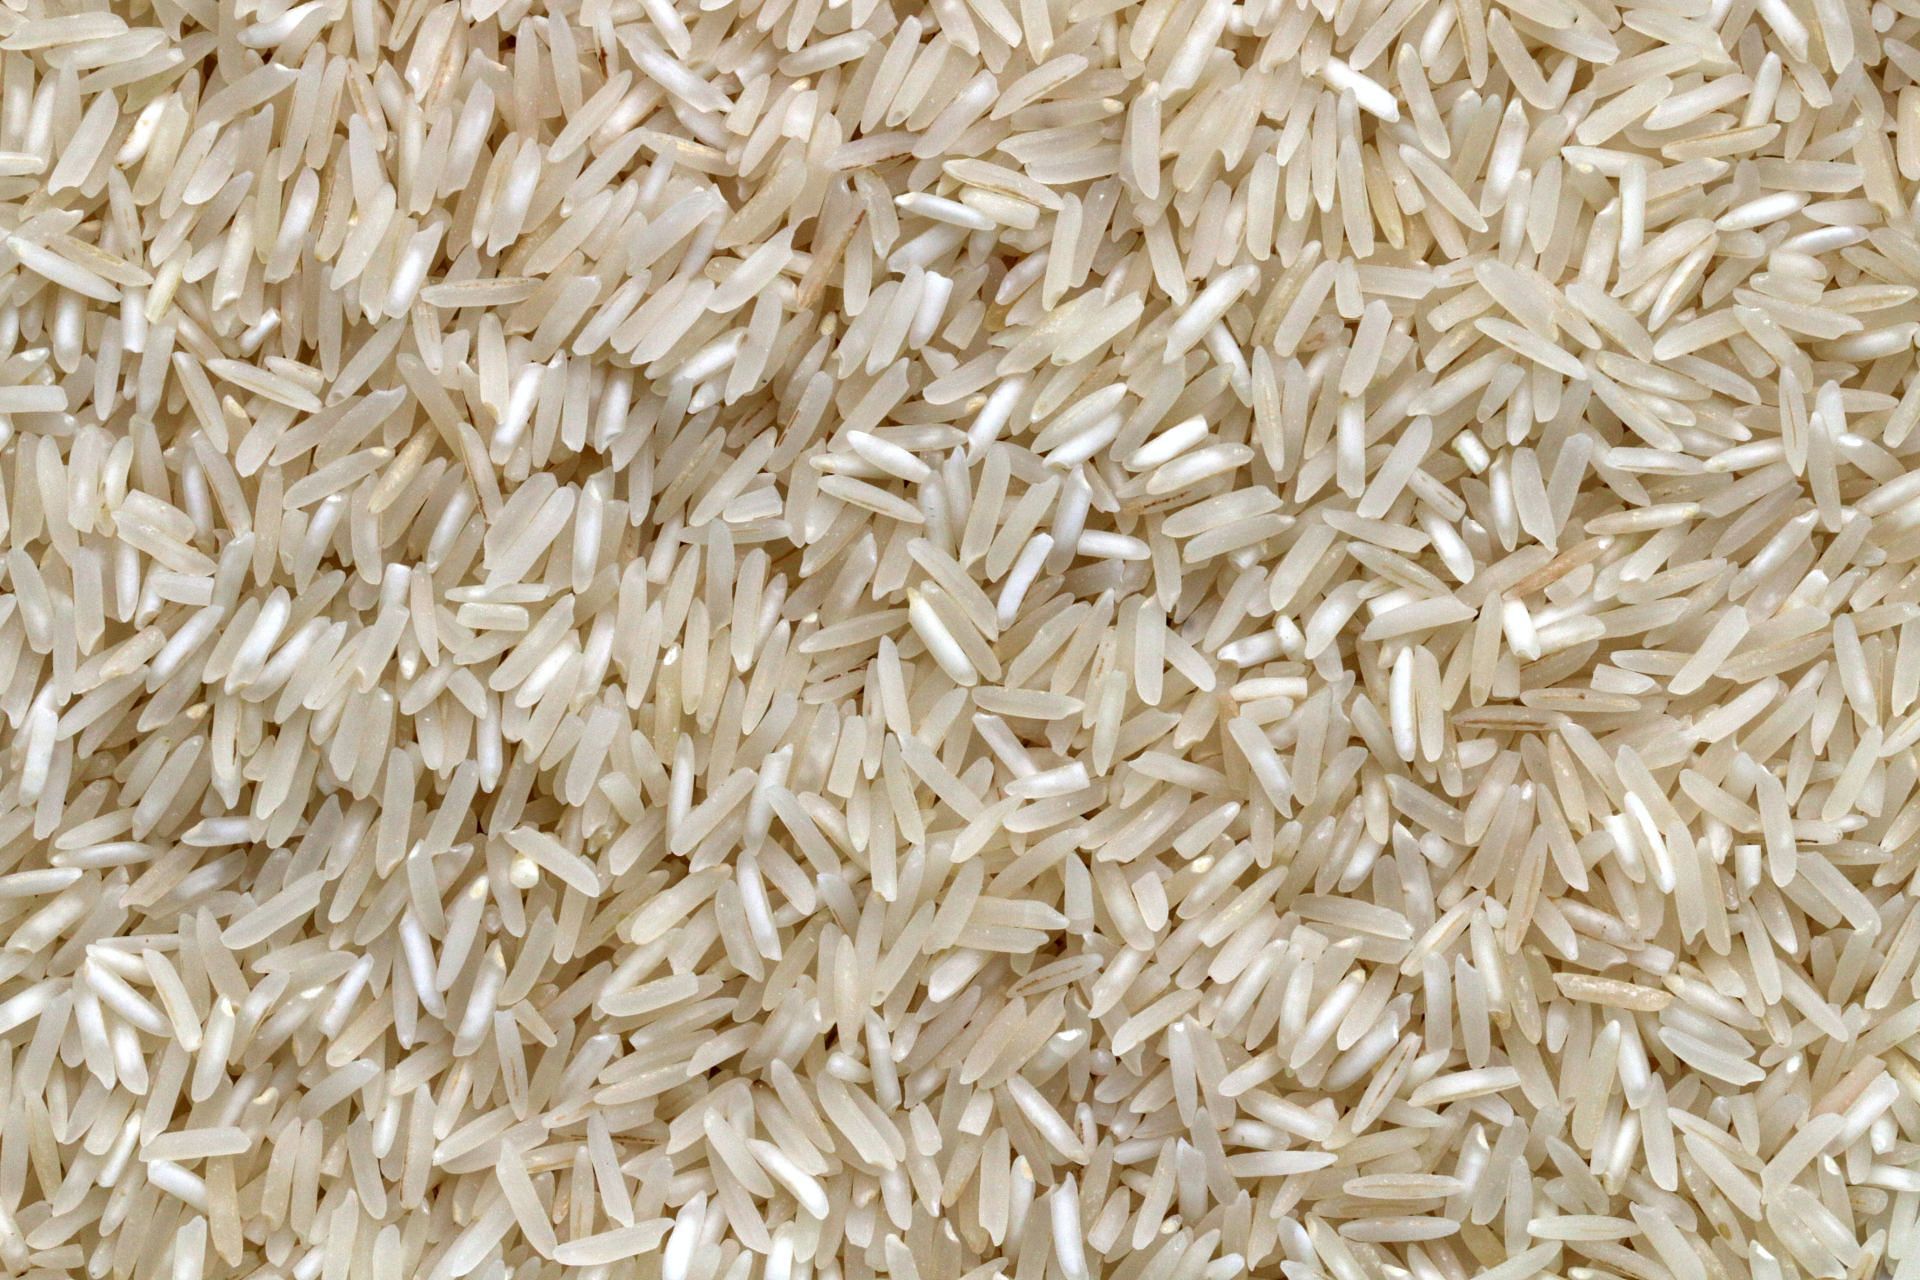 Natural skincare: Rice water for face (image via unsplash / pierre bamin)